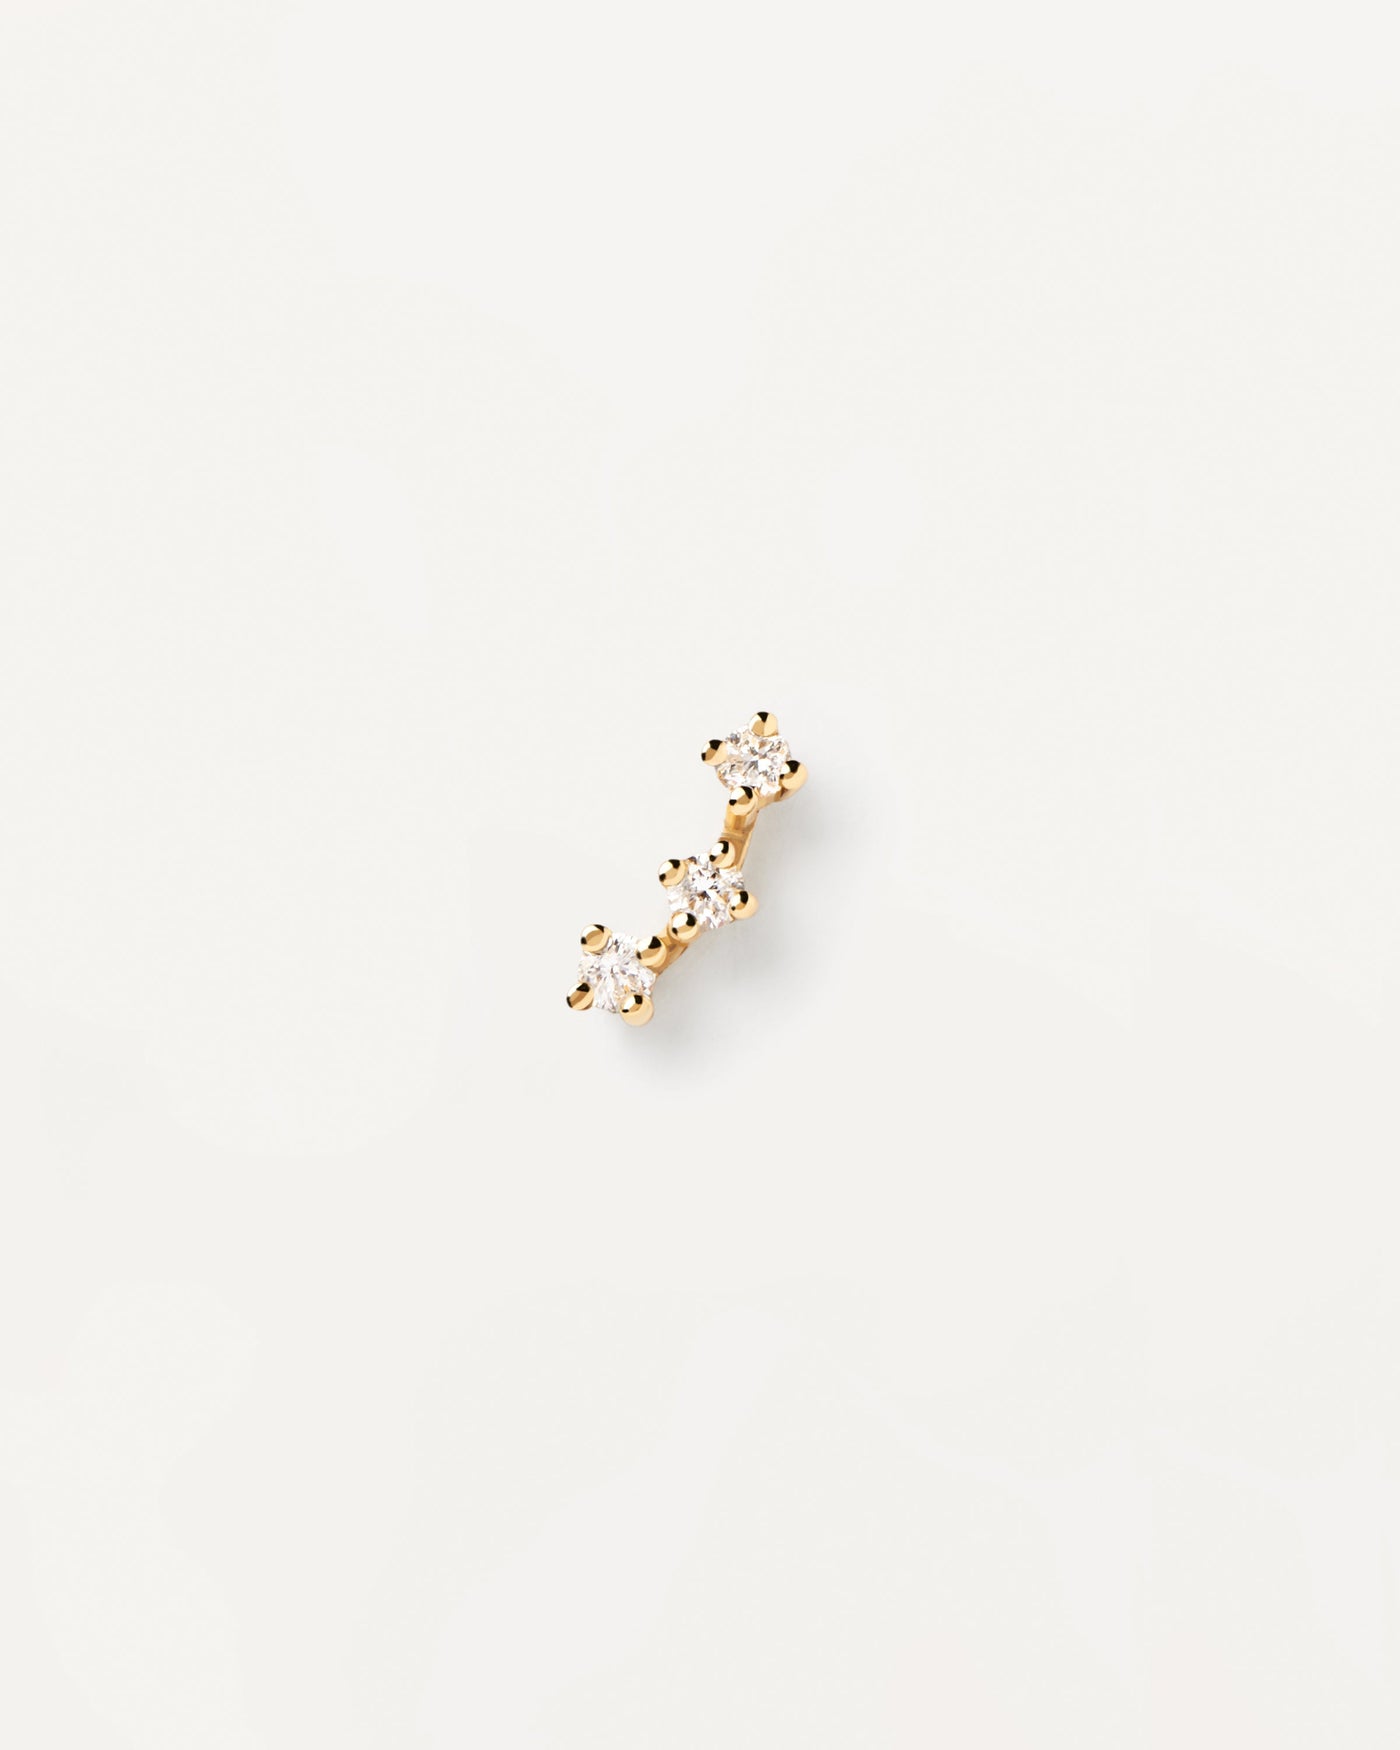 2023 Selection | Diamonds and gold Brooklyn Single Earring. Solid yellow gold ear piercing in arch shape with three small diamonds of 0.04 carat. Get the latest arrival from PDPAOLA. Place your order safely and get this Best Seller. Free Shipping.